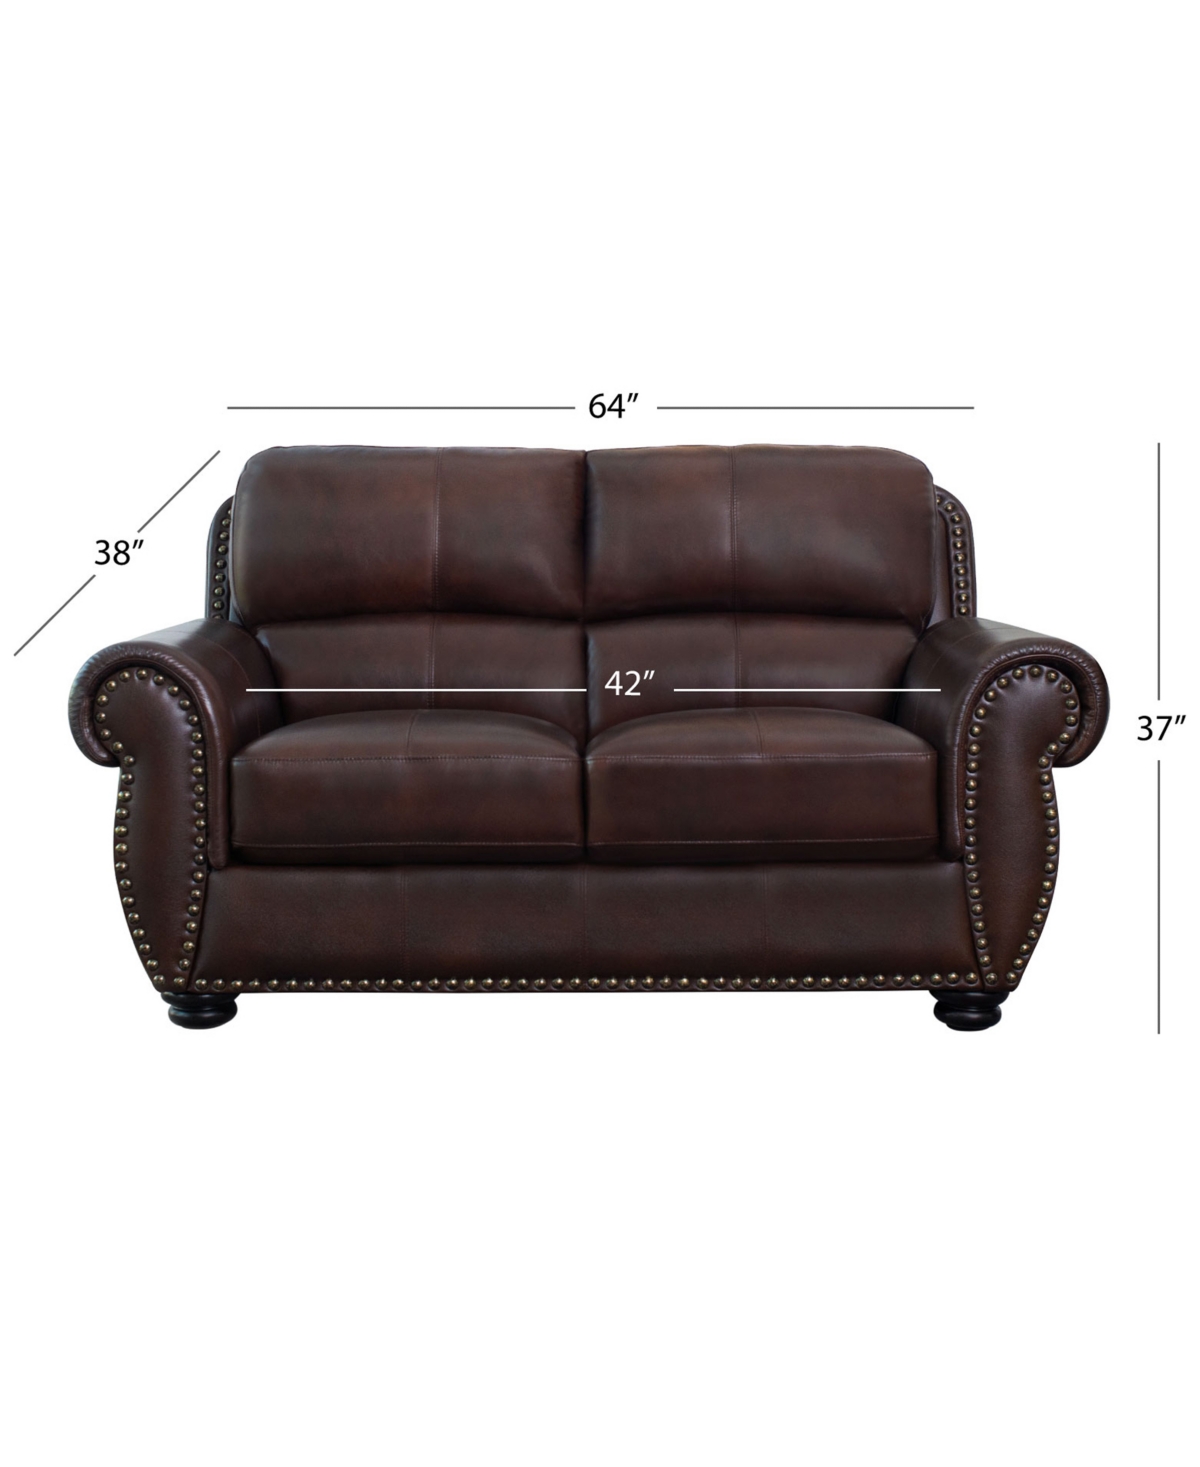 Shop Abbyson Living Arther 64" Leather Traditional Loveseat In Brown